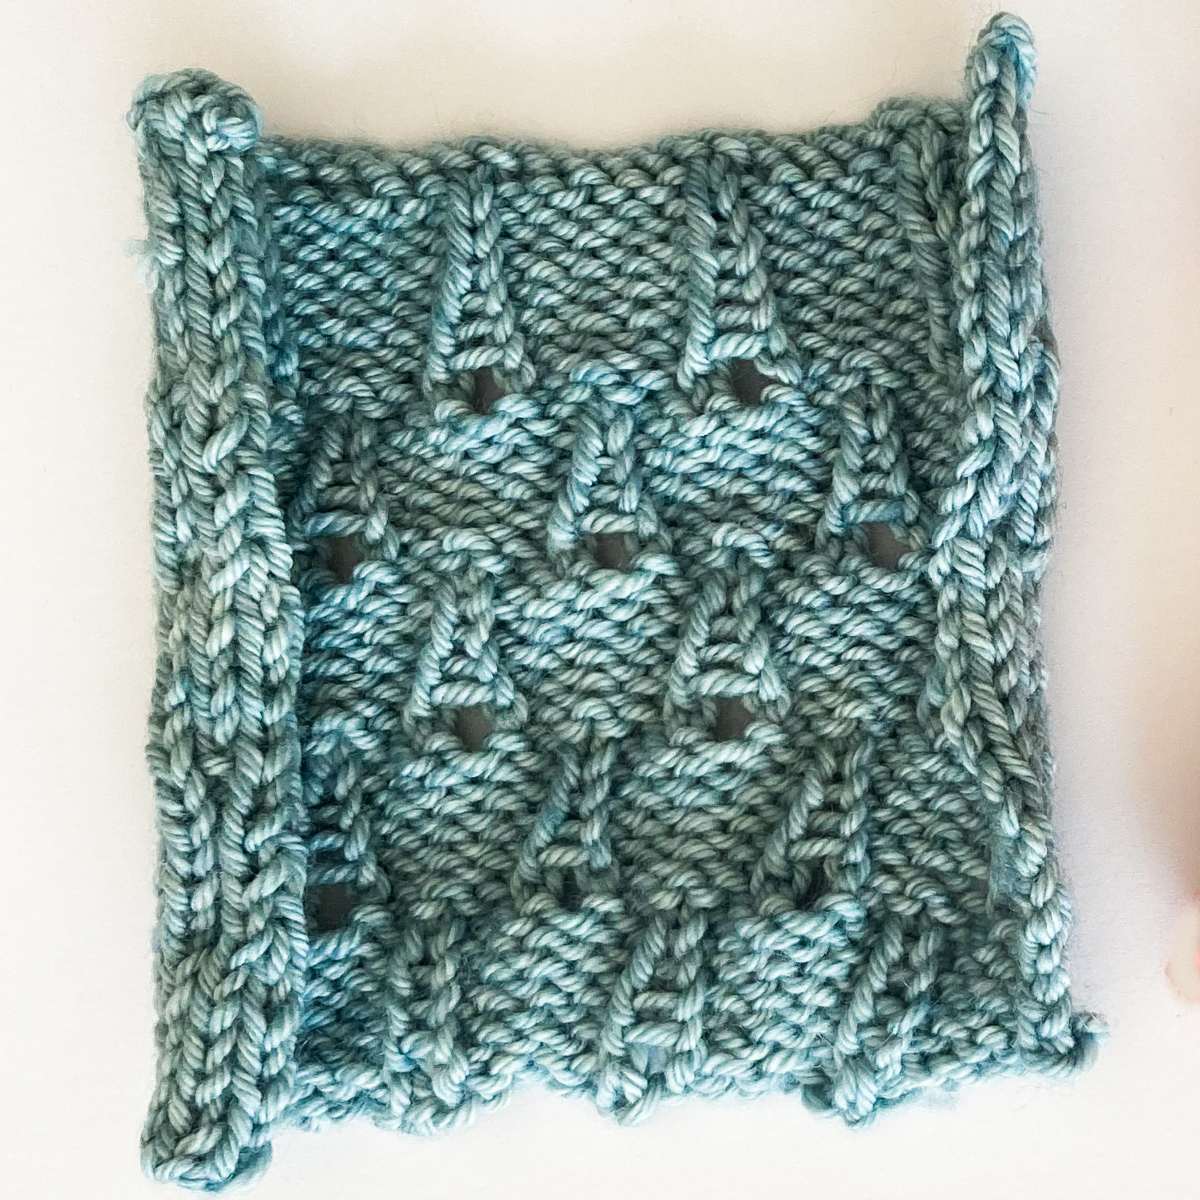 Raindrop stitch swatch laying flat knit in Cowgirlblues Merino DK colour Seagrass.